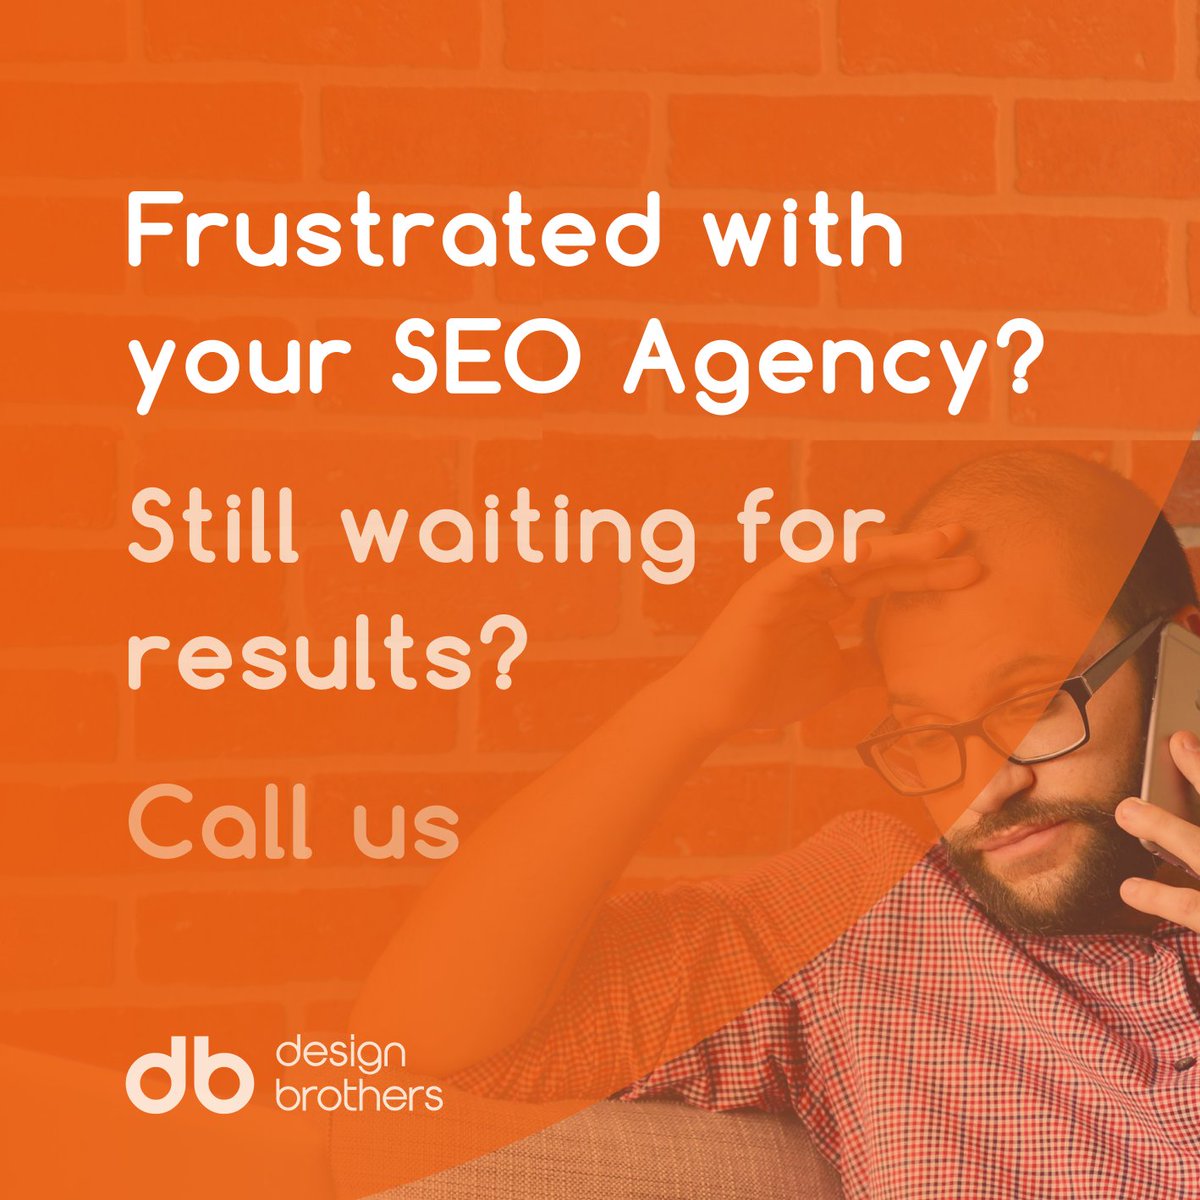 Frustrated with your SEO Agency? Still waiting for results? Message us or call 0208 654 3219 #seoagency #seoagencylondon #seocompany #seocompanylondon #seoexpert #seoexperts #seolondon #londonseo #seosurrey #surreyseo #seomarkering #seoservices #seouk #websiteseo #seostrategy